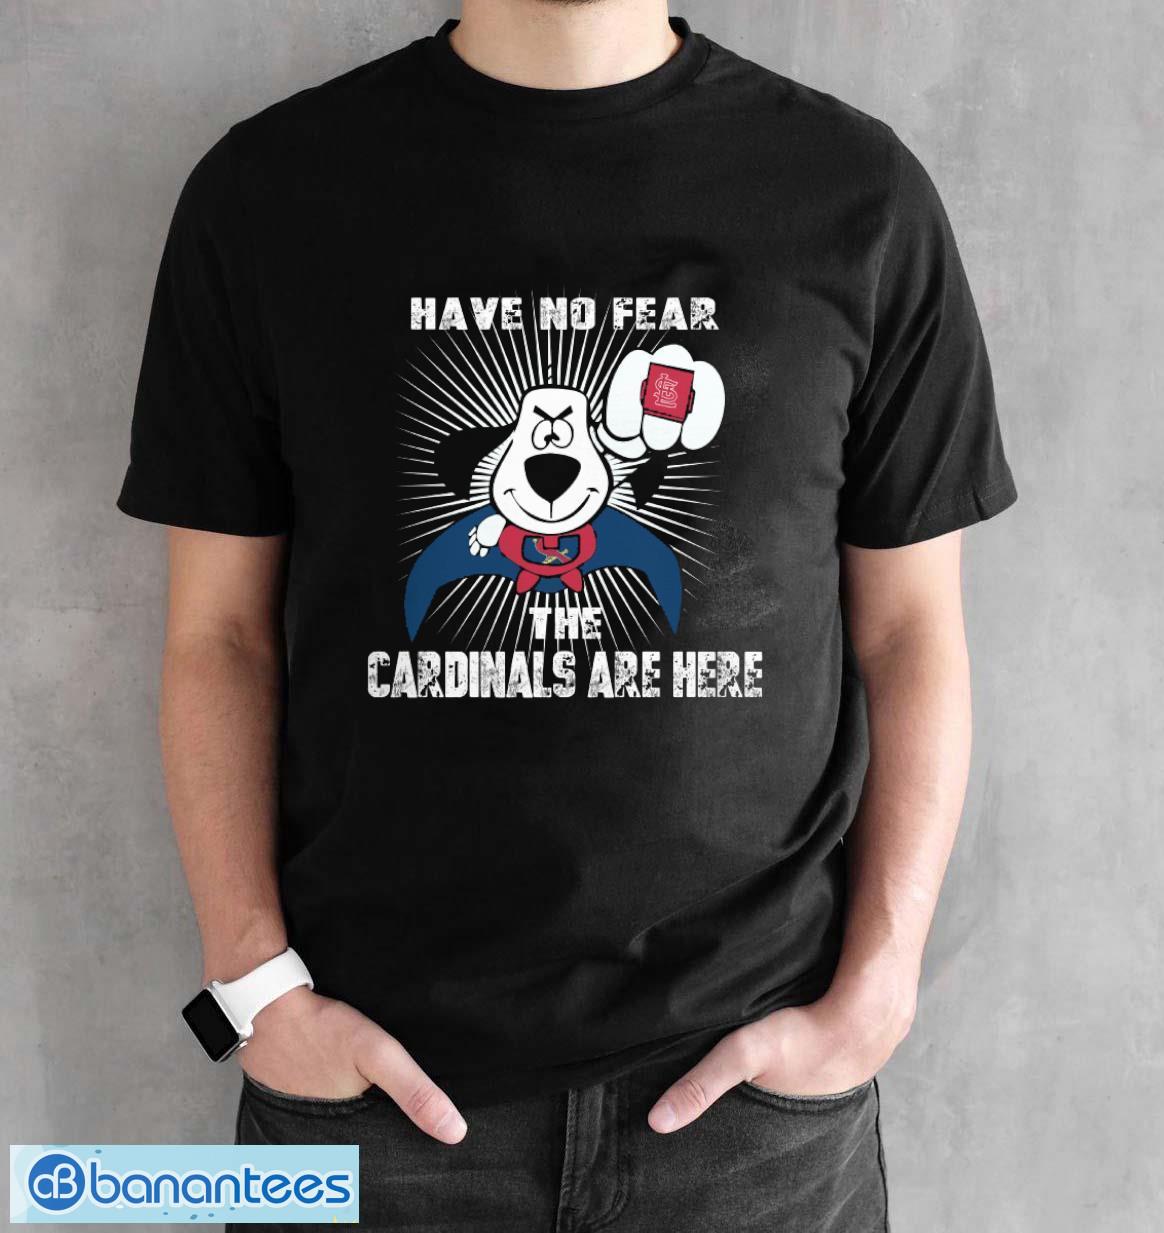 Have No Fear The St Louis Cardinals Are Here Funny Black T Shirt Sweatshirt  For Fans - Banantees